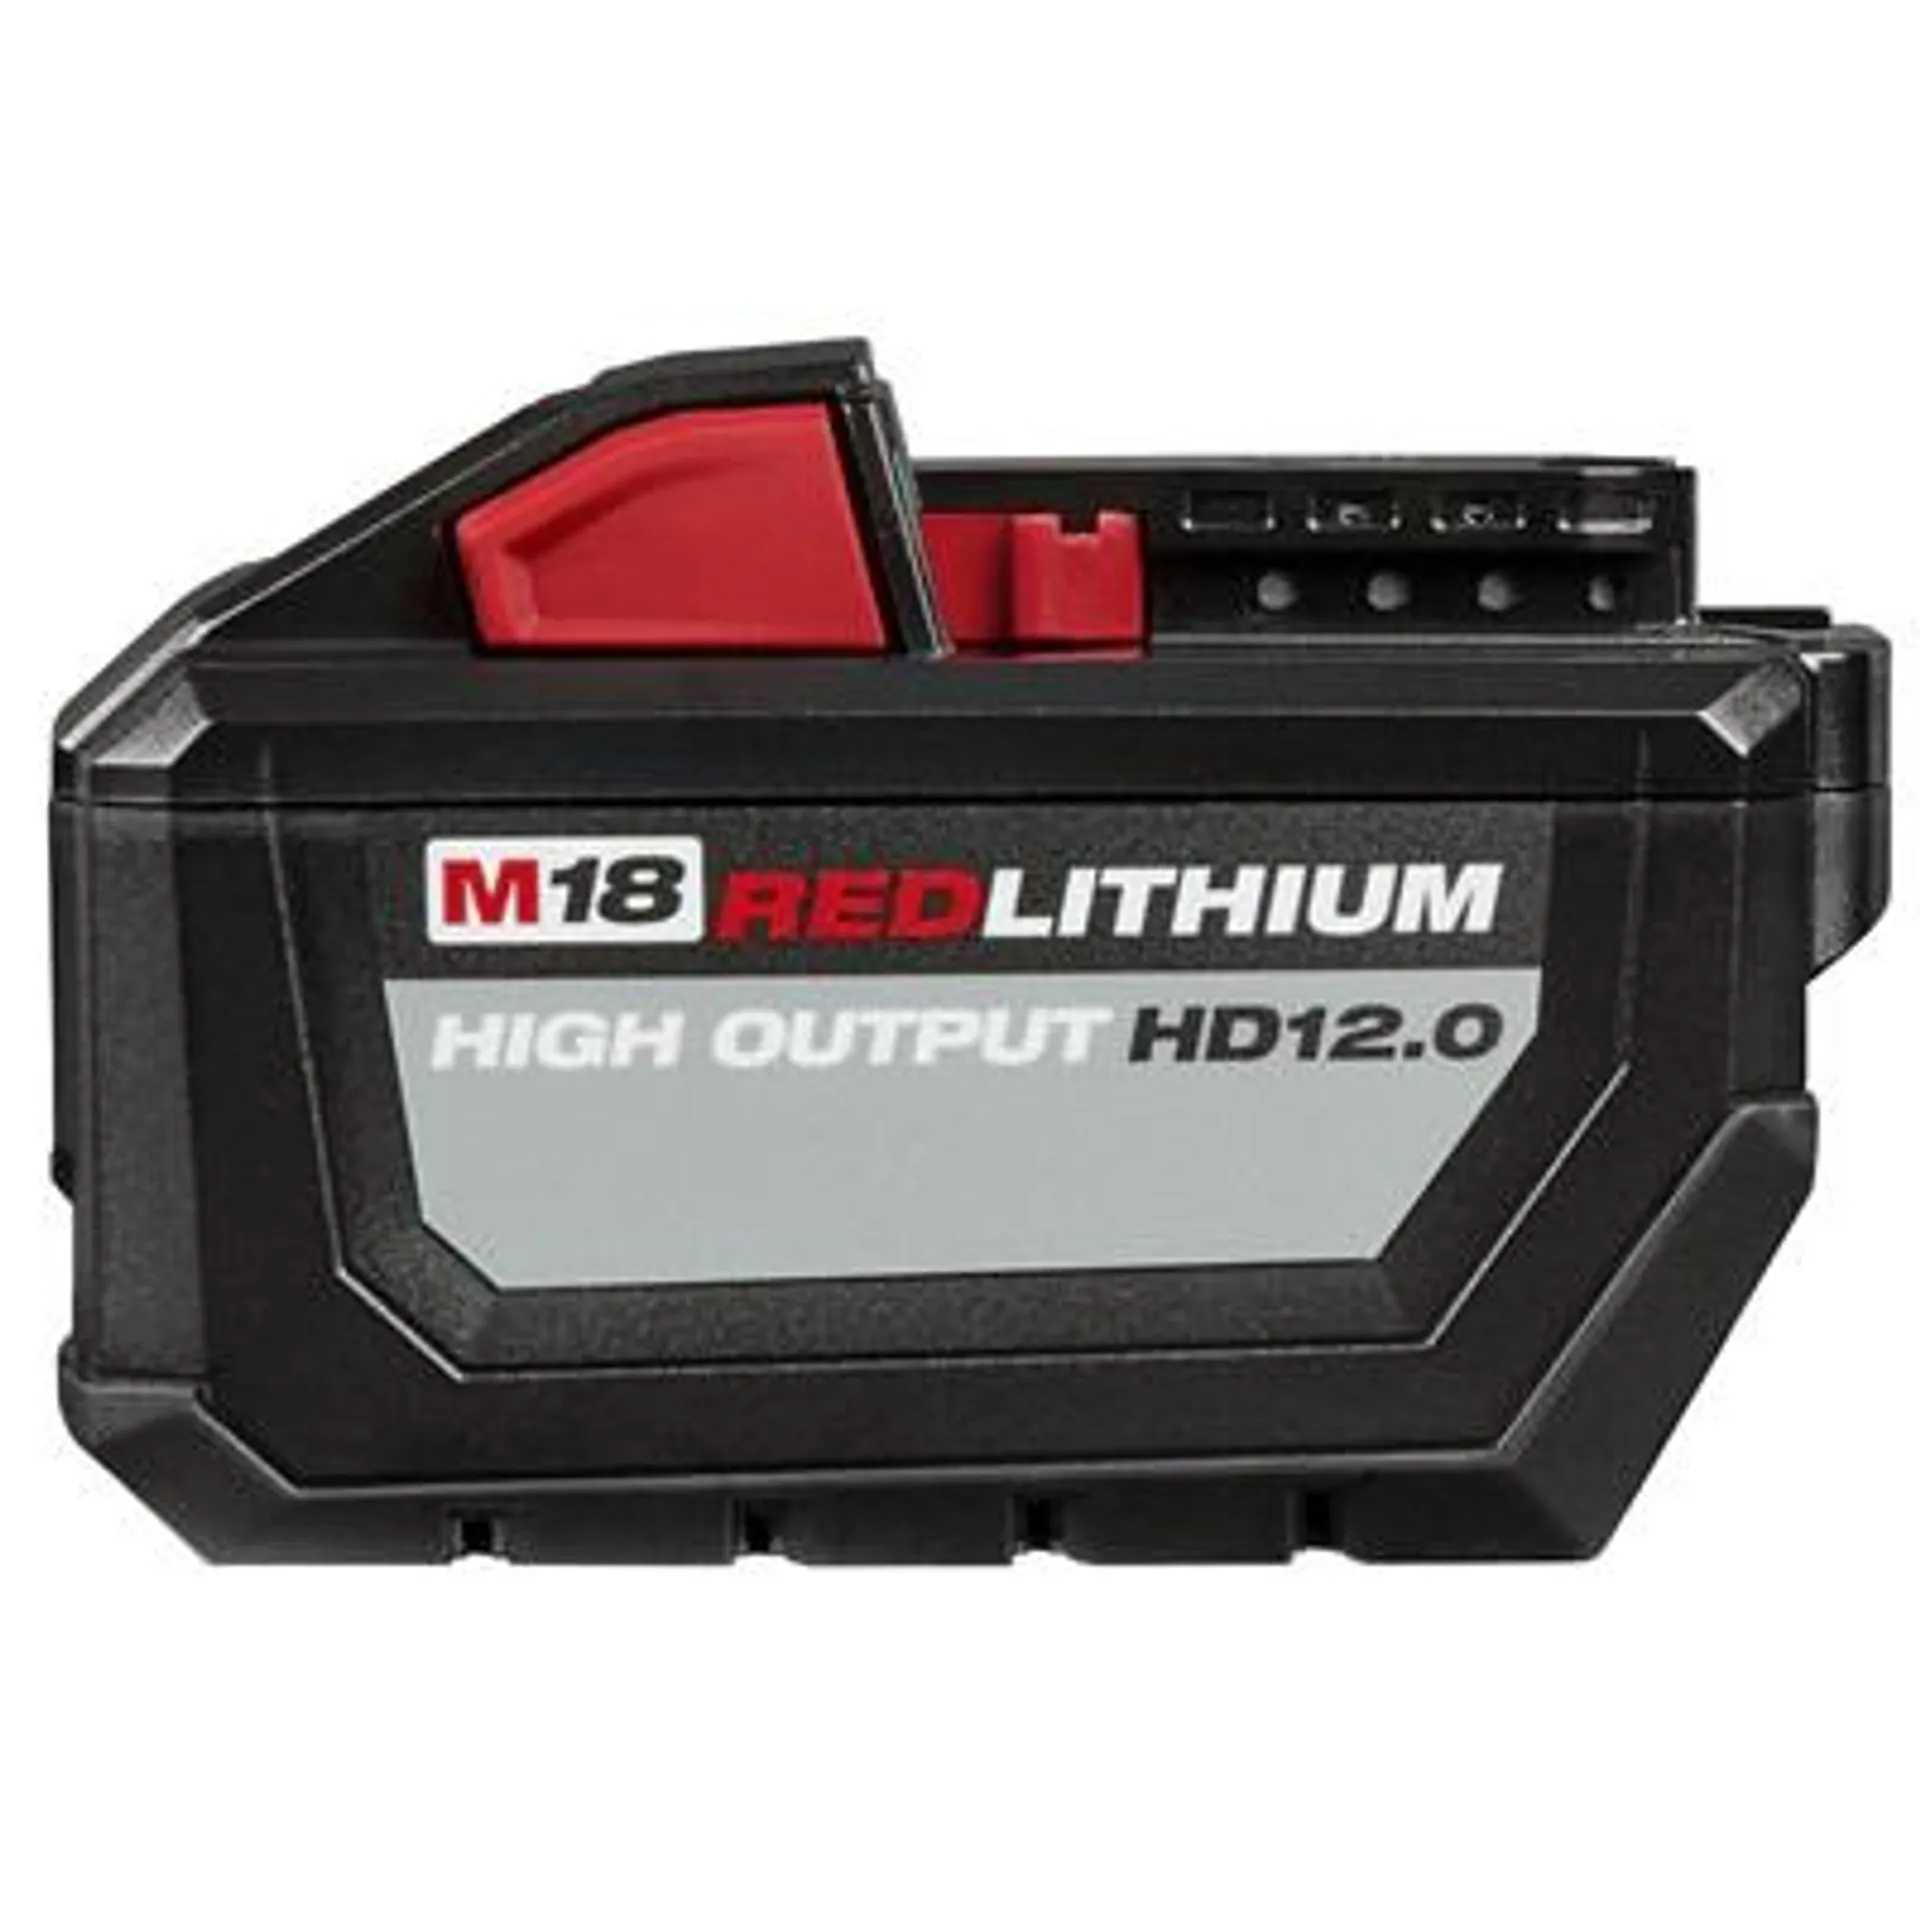 Milwaukee® M18™ REDLITHIUM™ HIGH OUTPUT™ HD12.0 18 Volt Lithium-Ion Amp Battery Pack